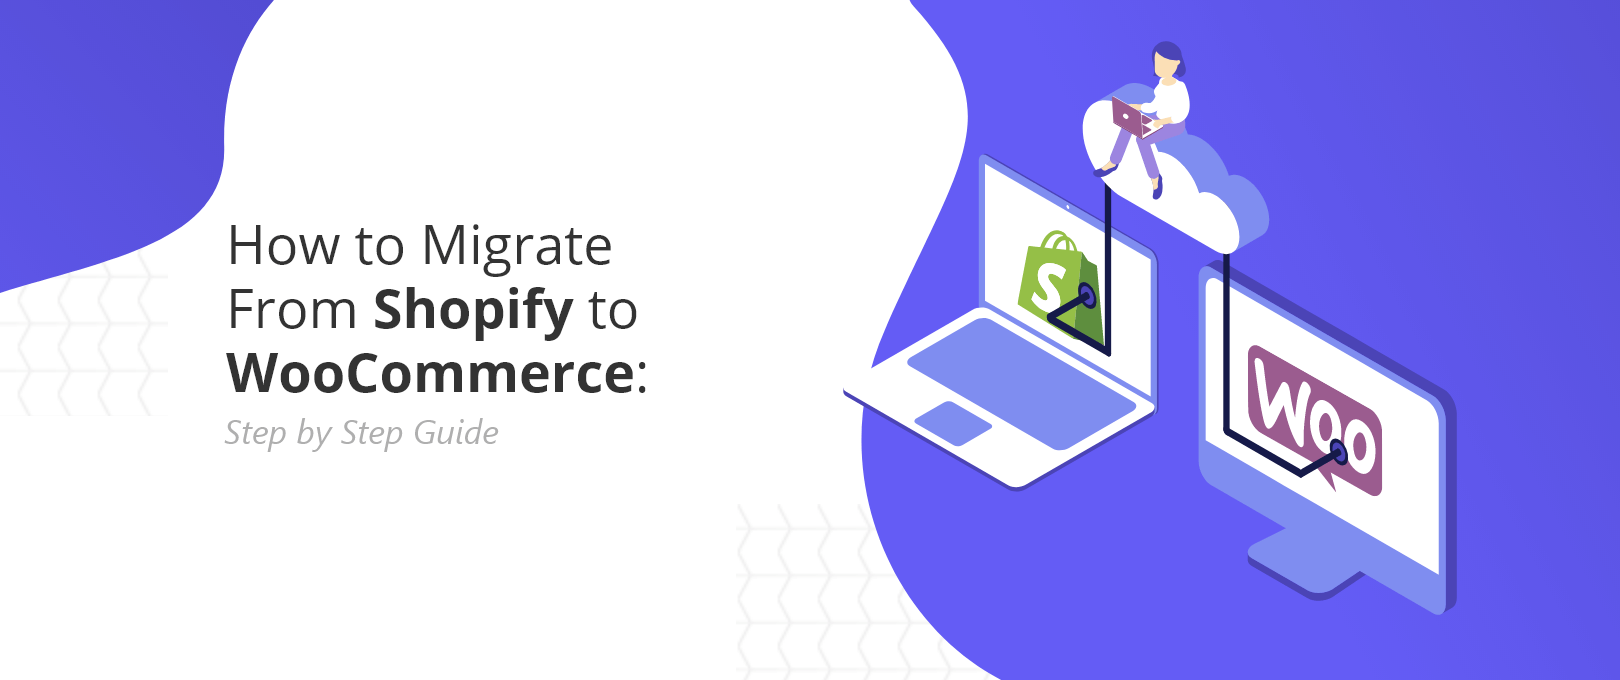 How to Migrate From Shopify to WooCommerce: Step by Step Guide - DevriX